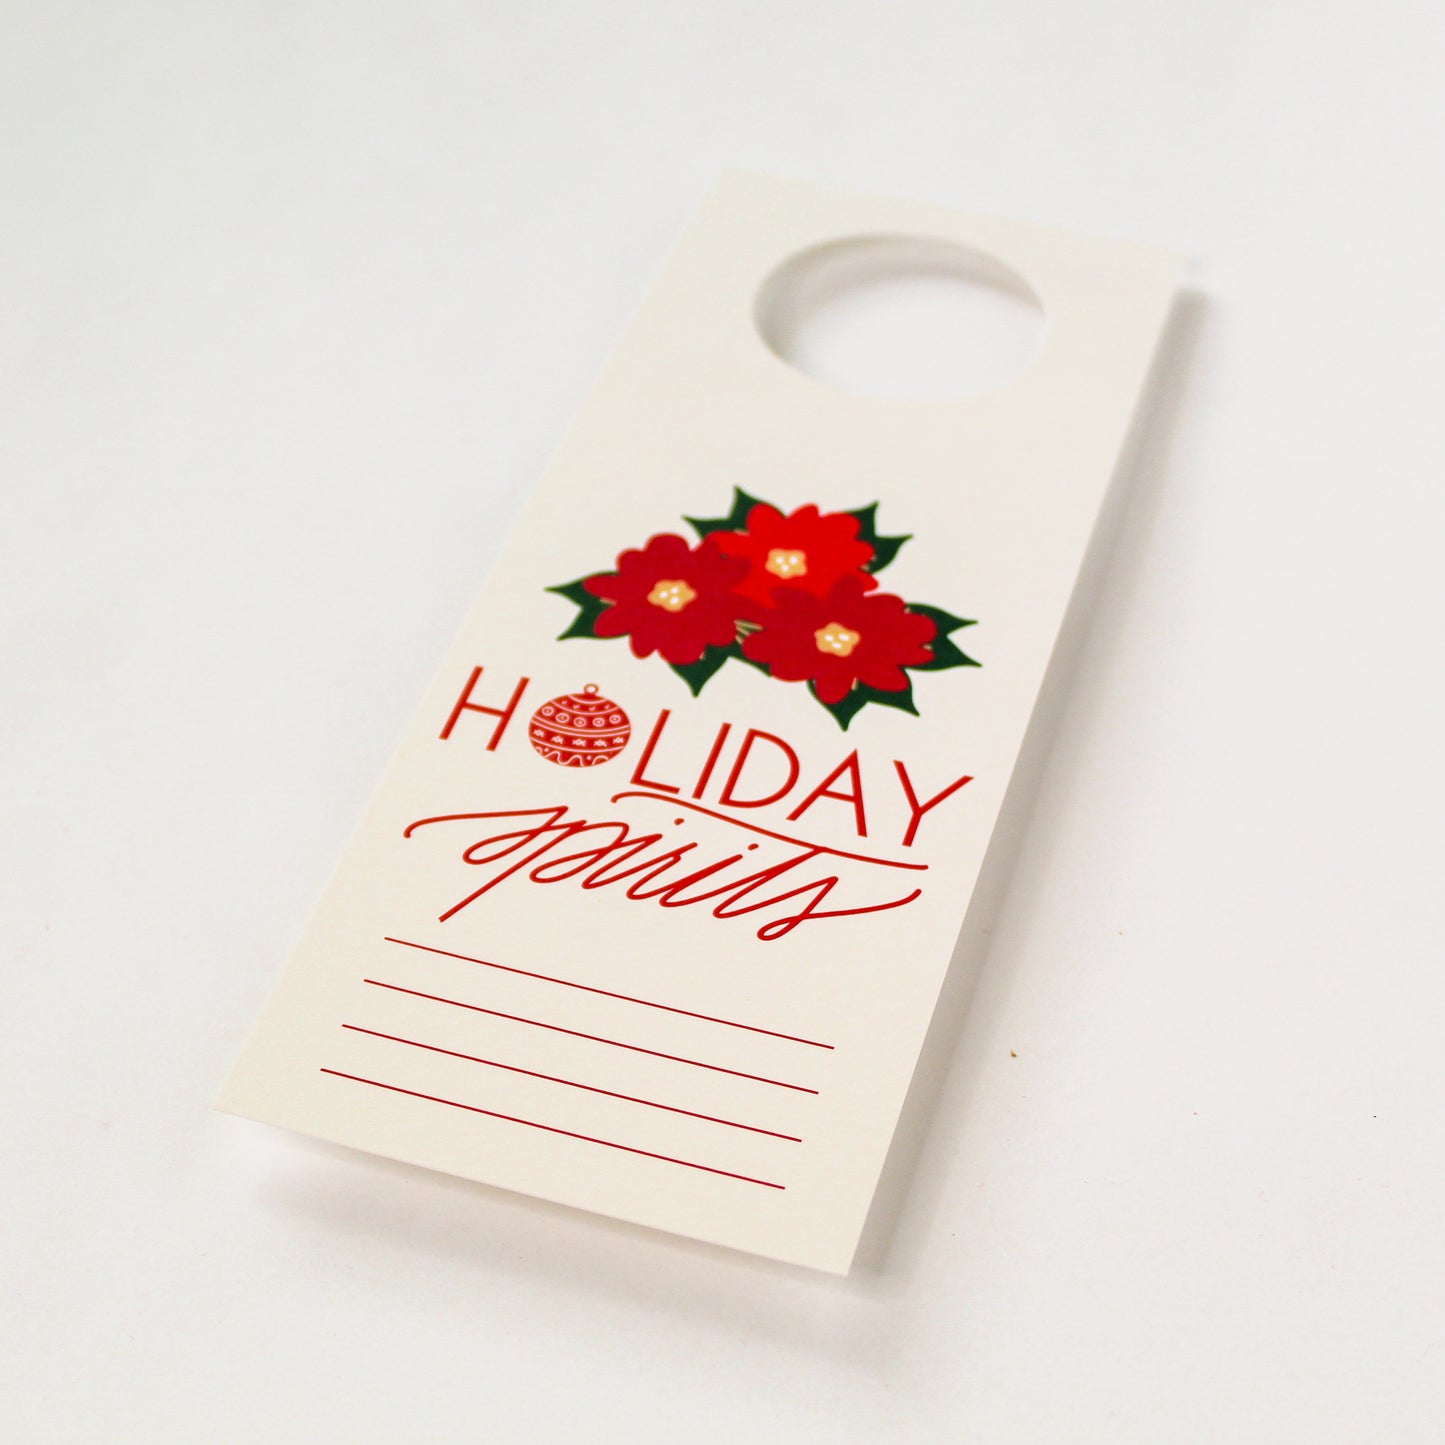 Holiday Spirits Bottle Neck Gift Tags